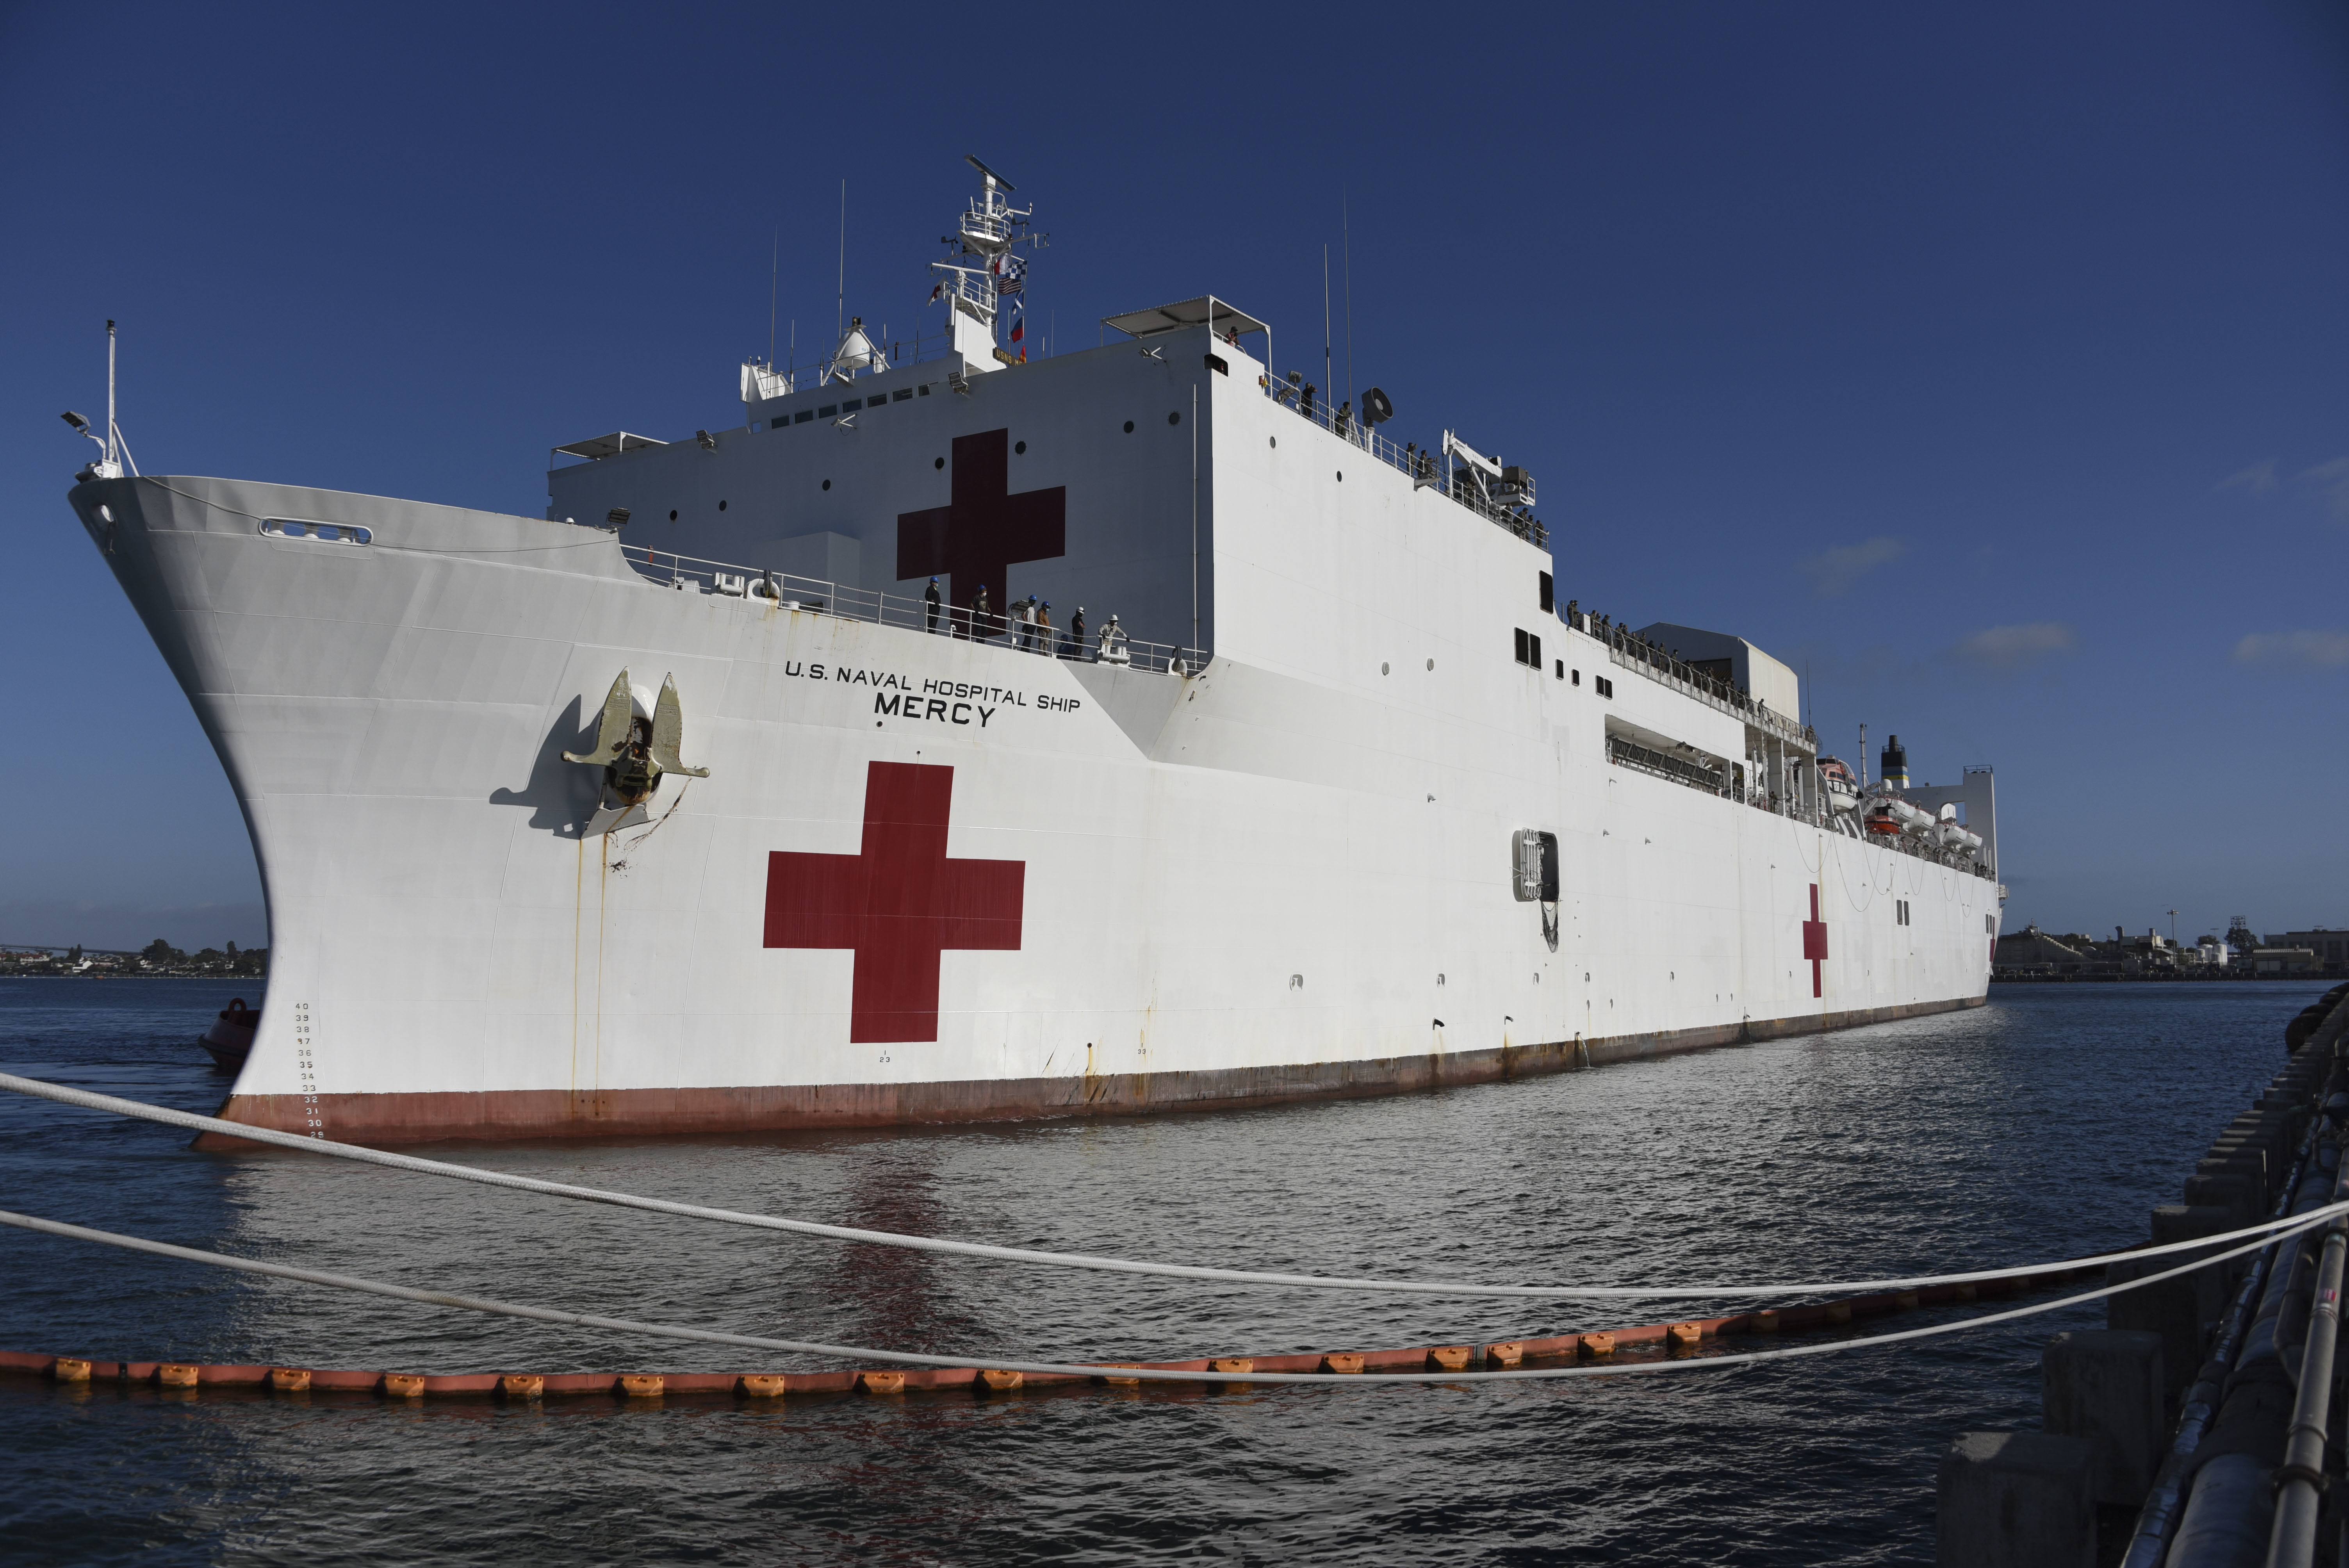 SAN DIEGO (May 15, 2020) -- Hospital ship USNS Mercy (T-AH 19) arrives in San Diego May 15. Mercy deployed in support of the nation's COVID-19 response efforts, and served as a referral hospital for non-COVID-19 patients admitted to shore-based hospitals. This allowed shore-based hospitals to focus their efforts on COVID-19 cases. One of the Department of Defense's missions is Defense Support of Civil Authorities. DoD is supporting the Federal Emergency Management Agency, the lead federal agency, as well as state, local and public health authorities in helping protect the health and safety of the American people. (U.S. Navy photo by Mass Communication Specialist 3rd Class Tim Heaps)